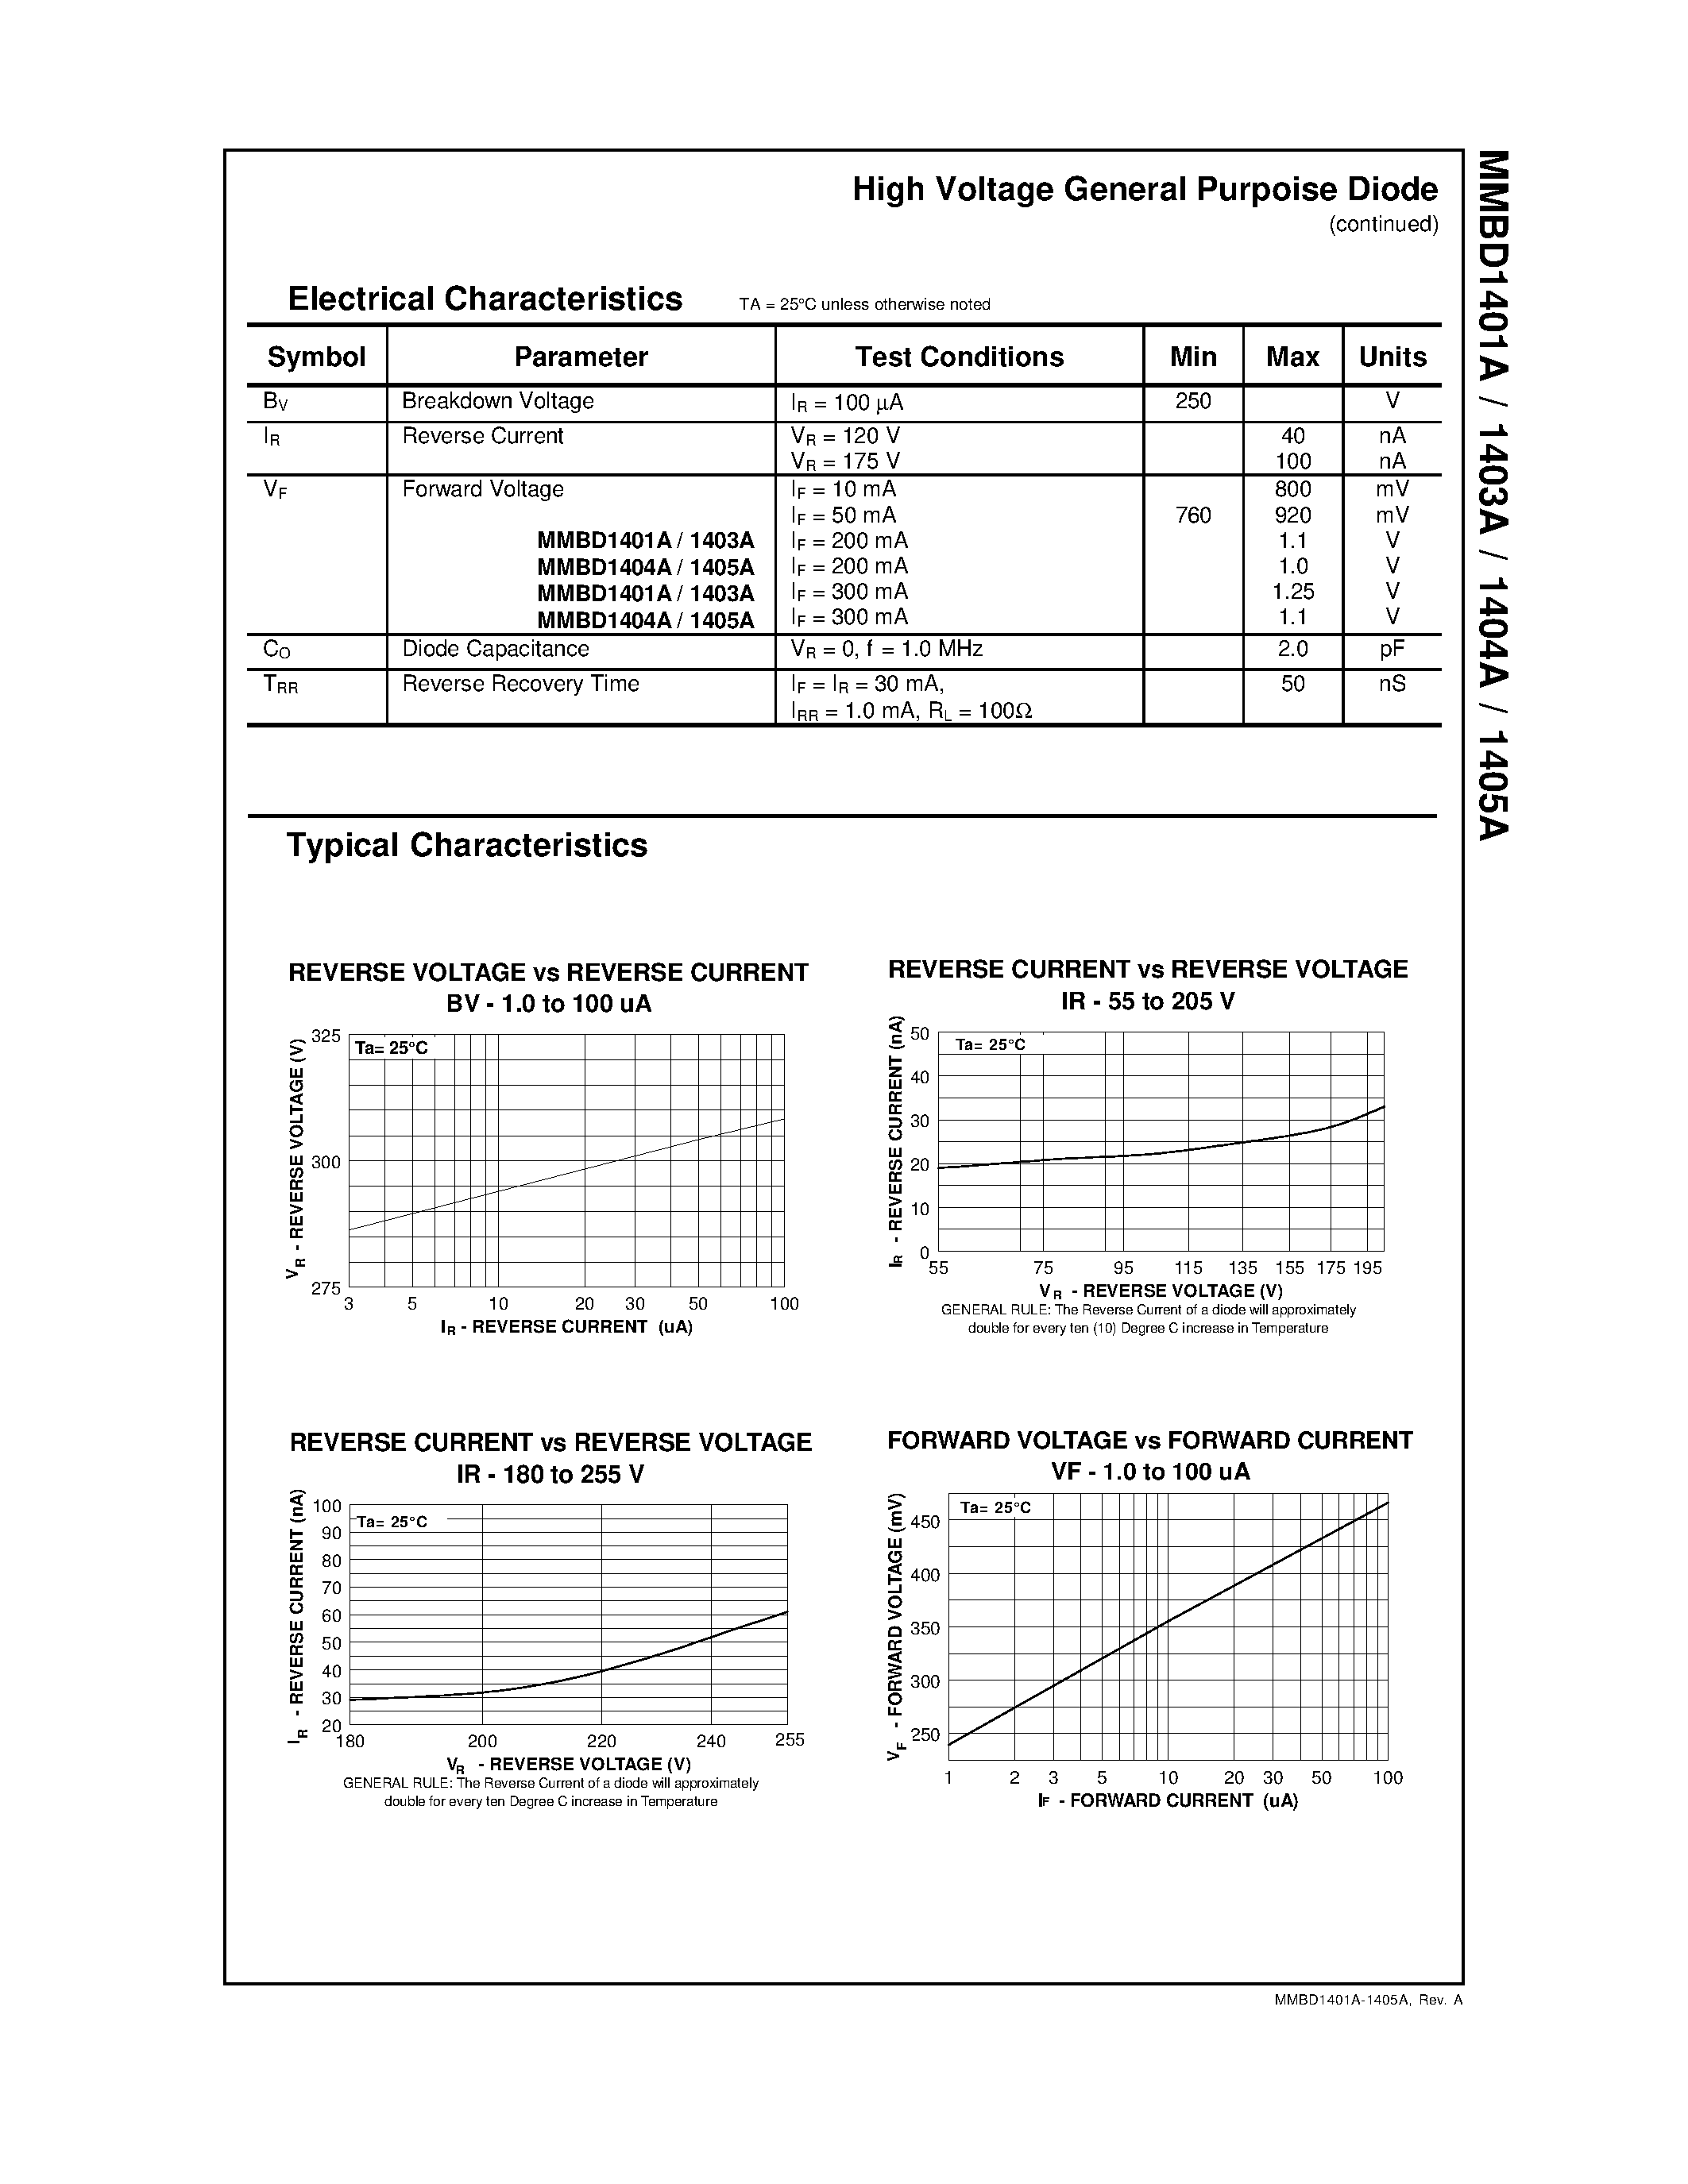 Datasheet MMBD1405A - High Voltage General Purpose Diode page 2